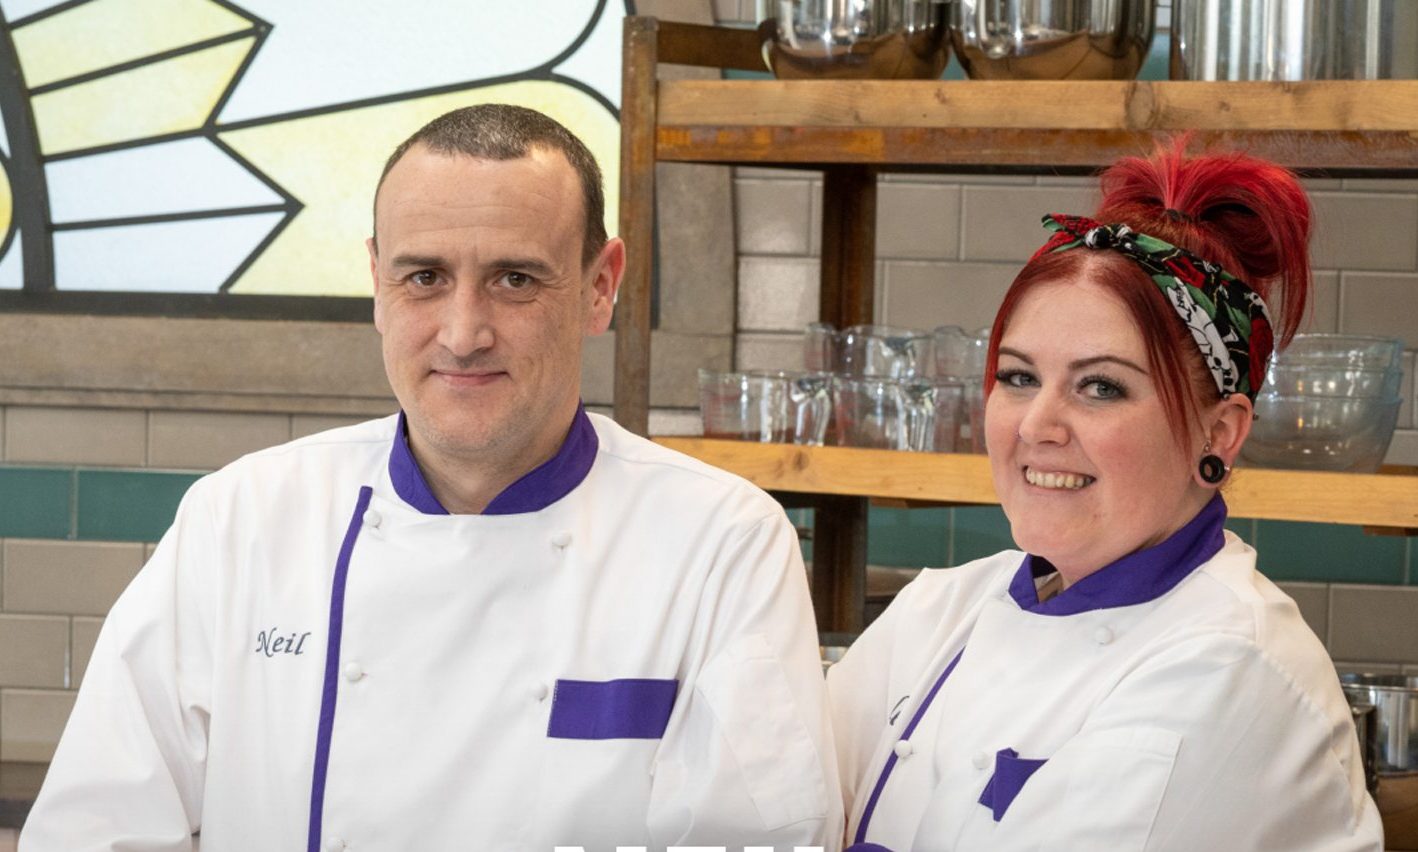 Neil and Nicole from Balbirnie are set to star in the latest series of Bake Off: The Professionals